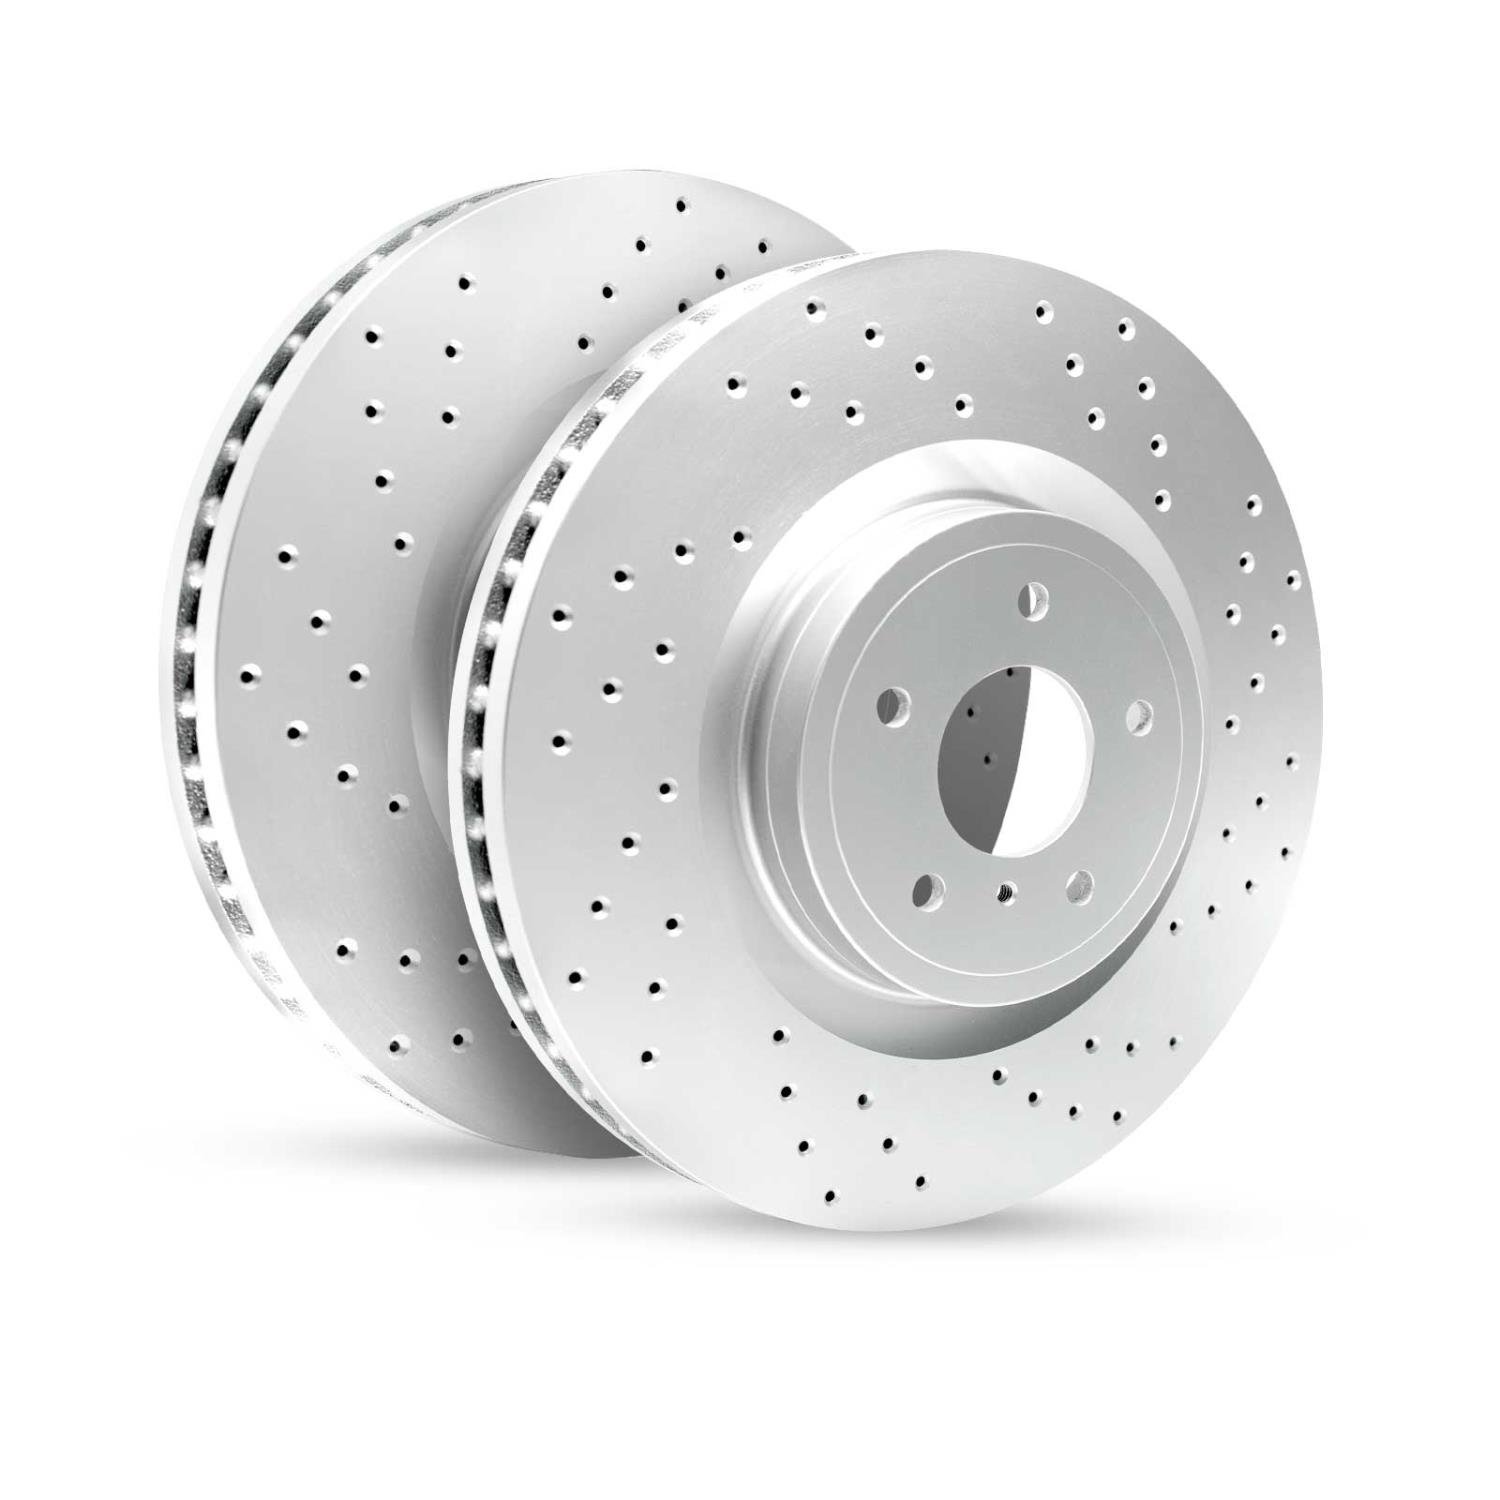 GEO-Carbon Drilled/Slotted Rotors, 2000-2006 BMW, Position: Rear